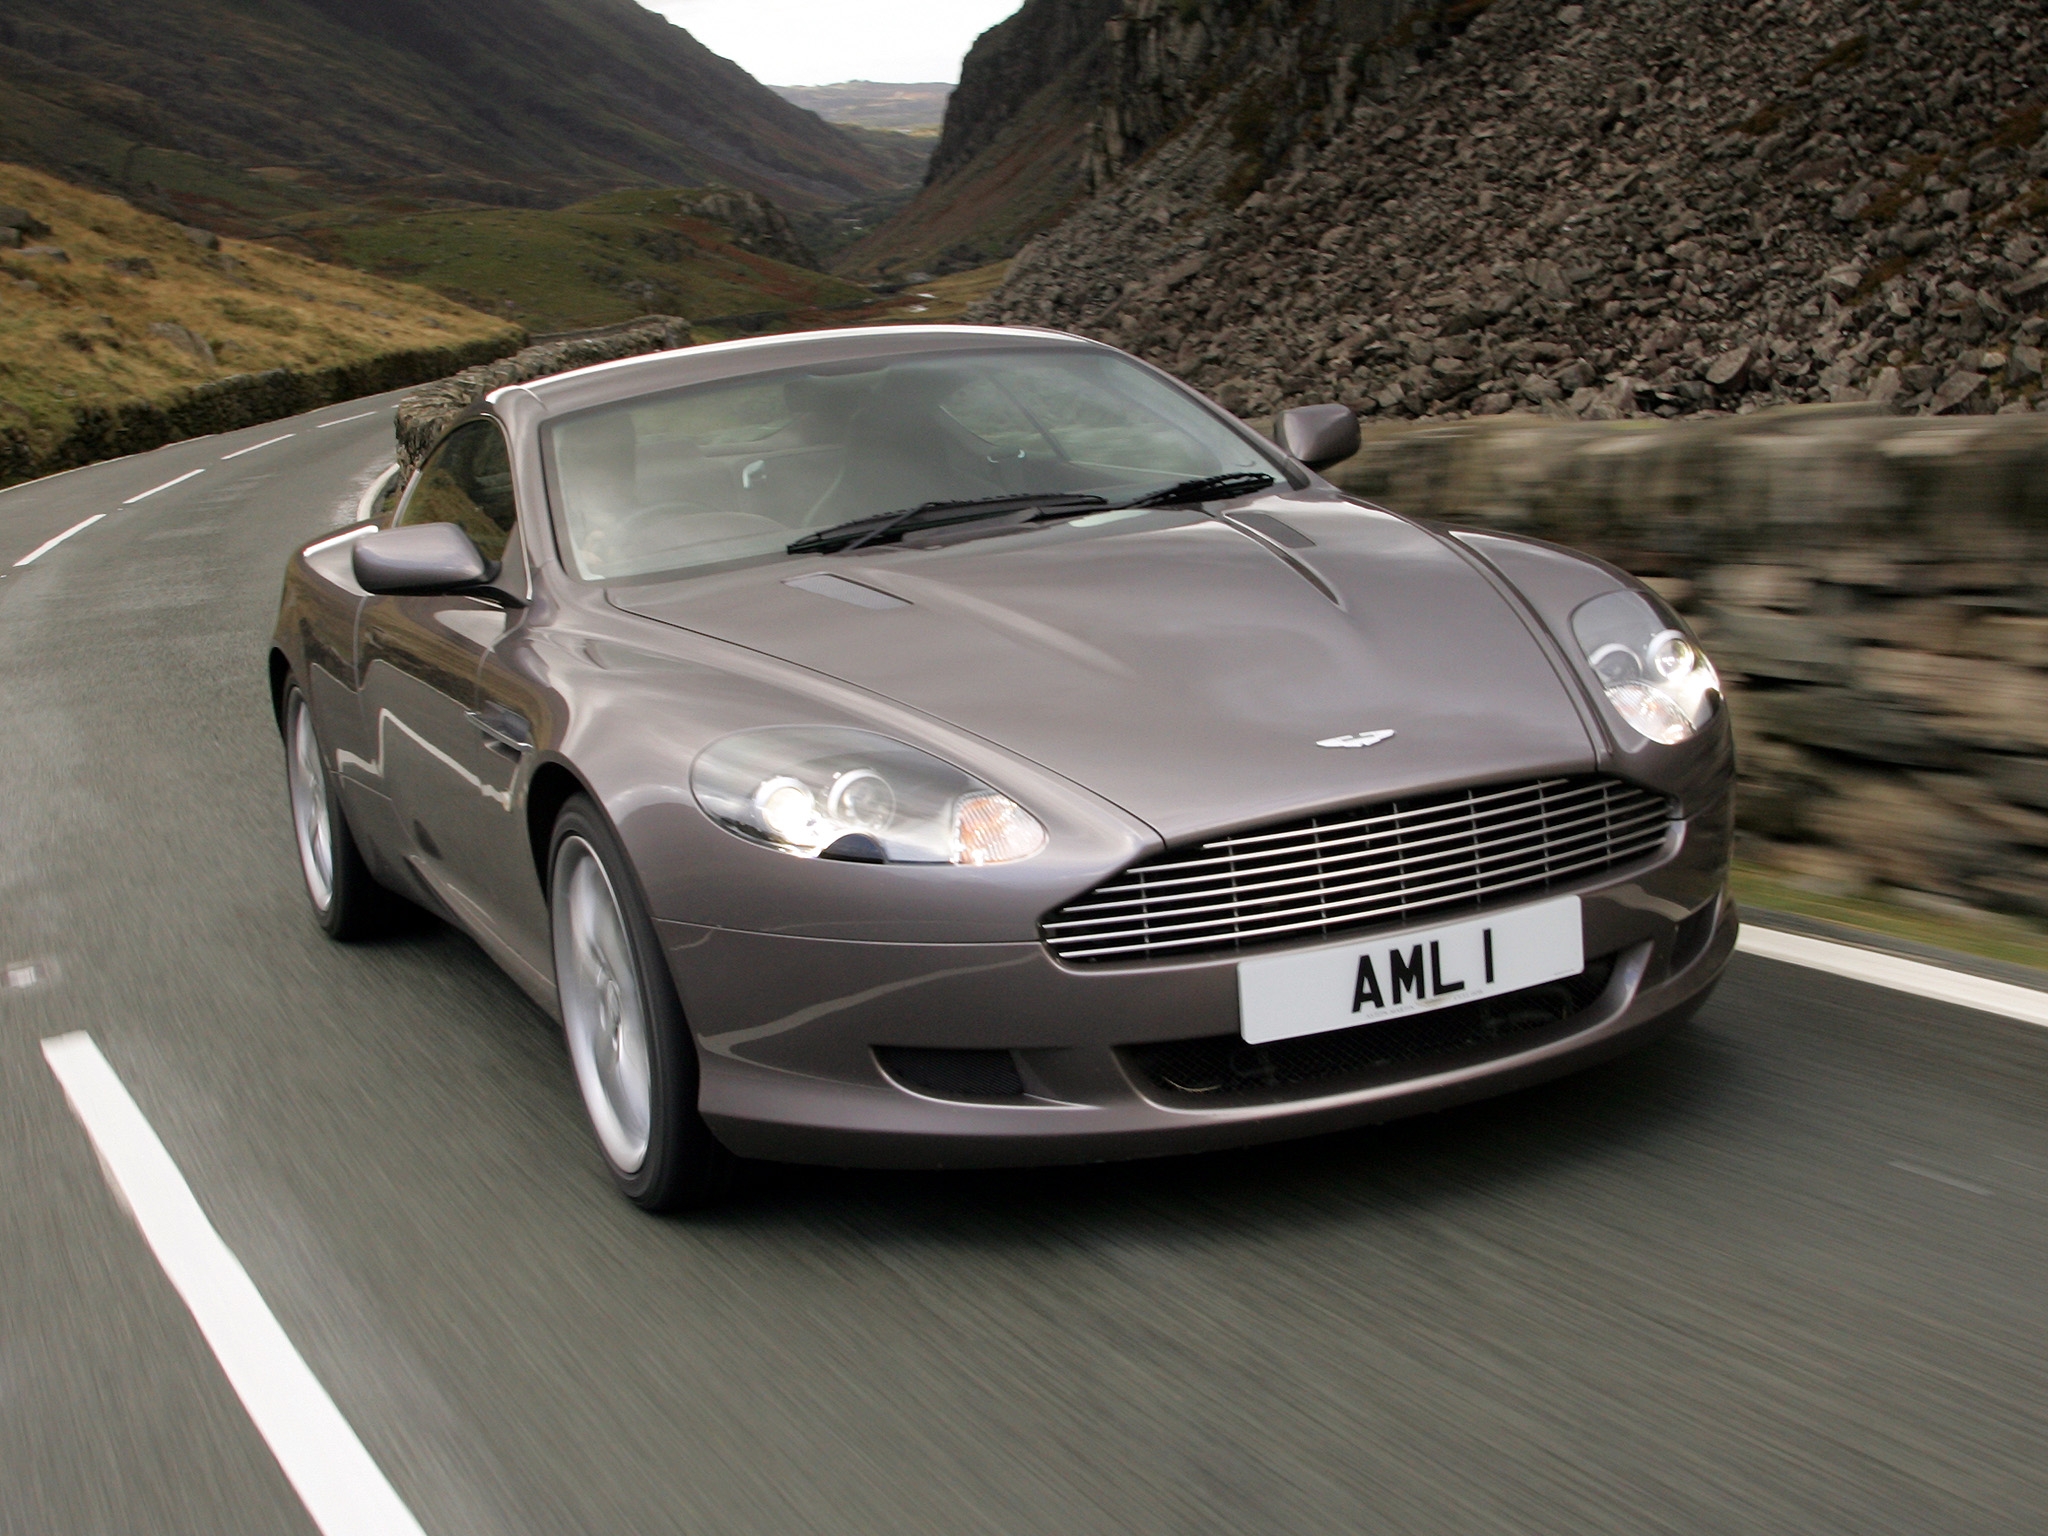 Cool Wallpapers auto, mountains, aston martin, cars, asphalt, front view, grey, speed, style, 2004, db9